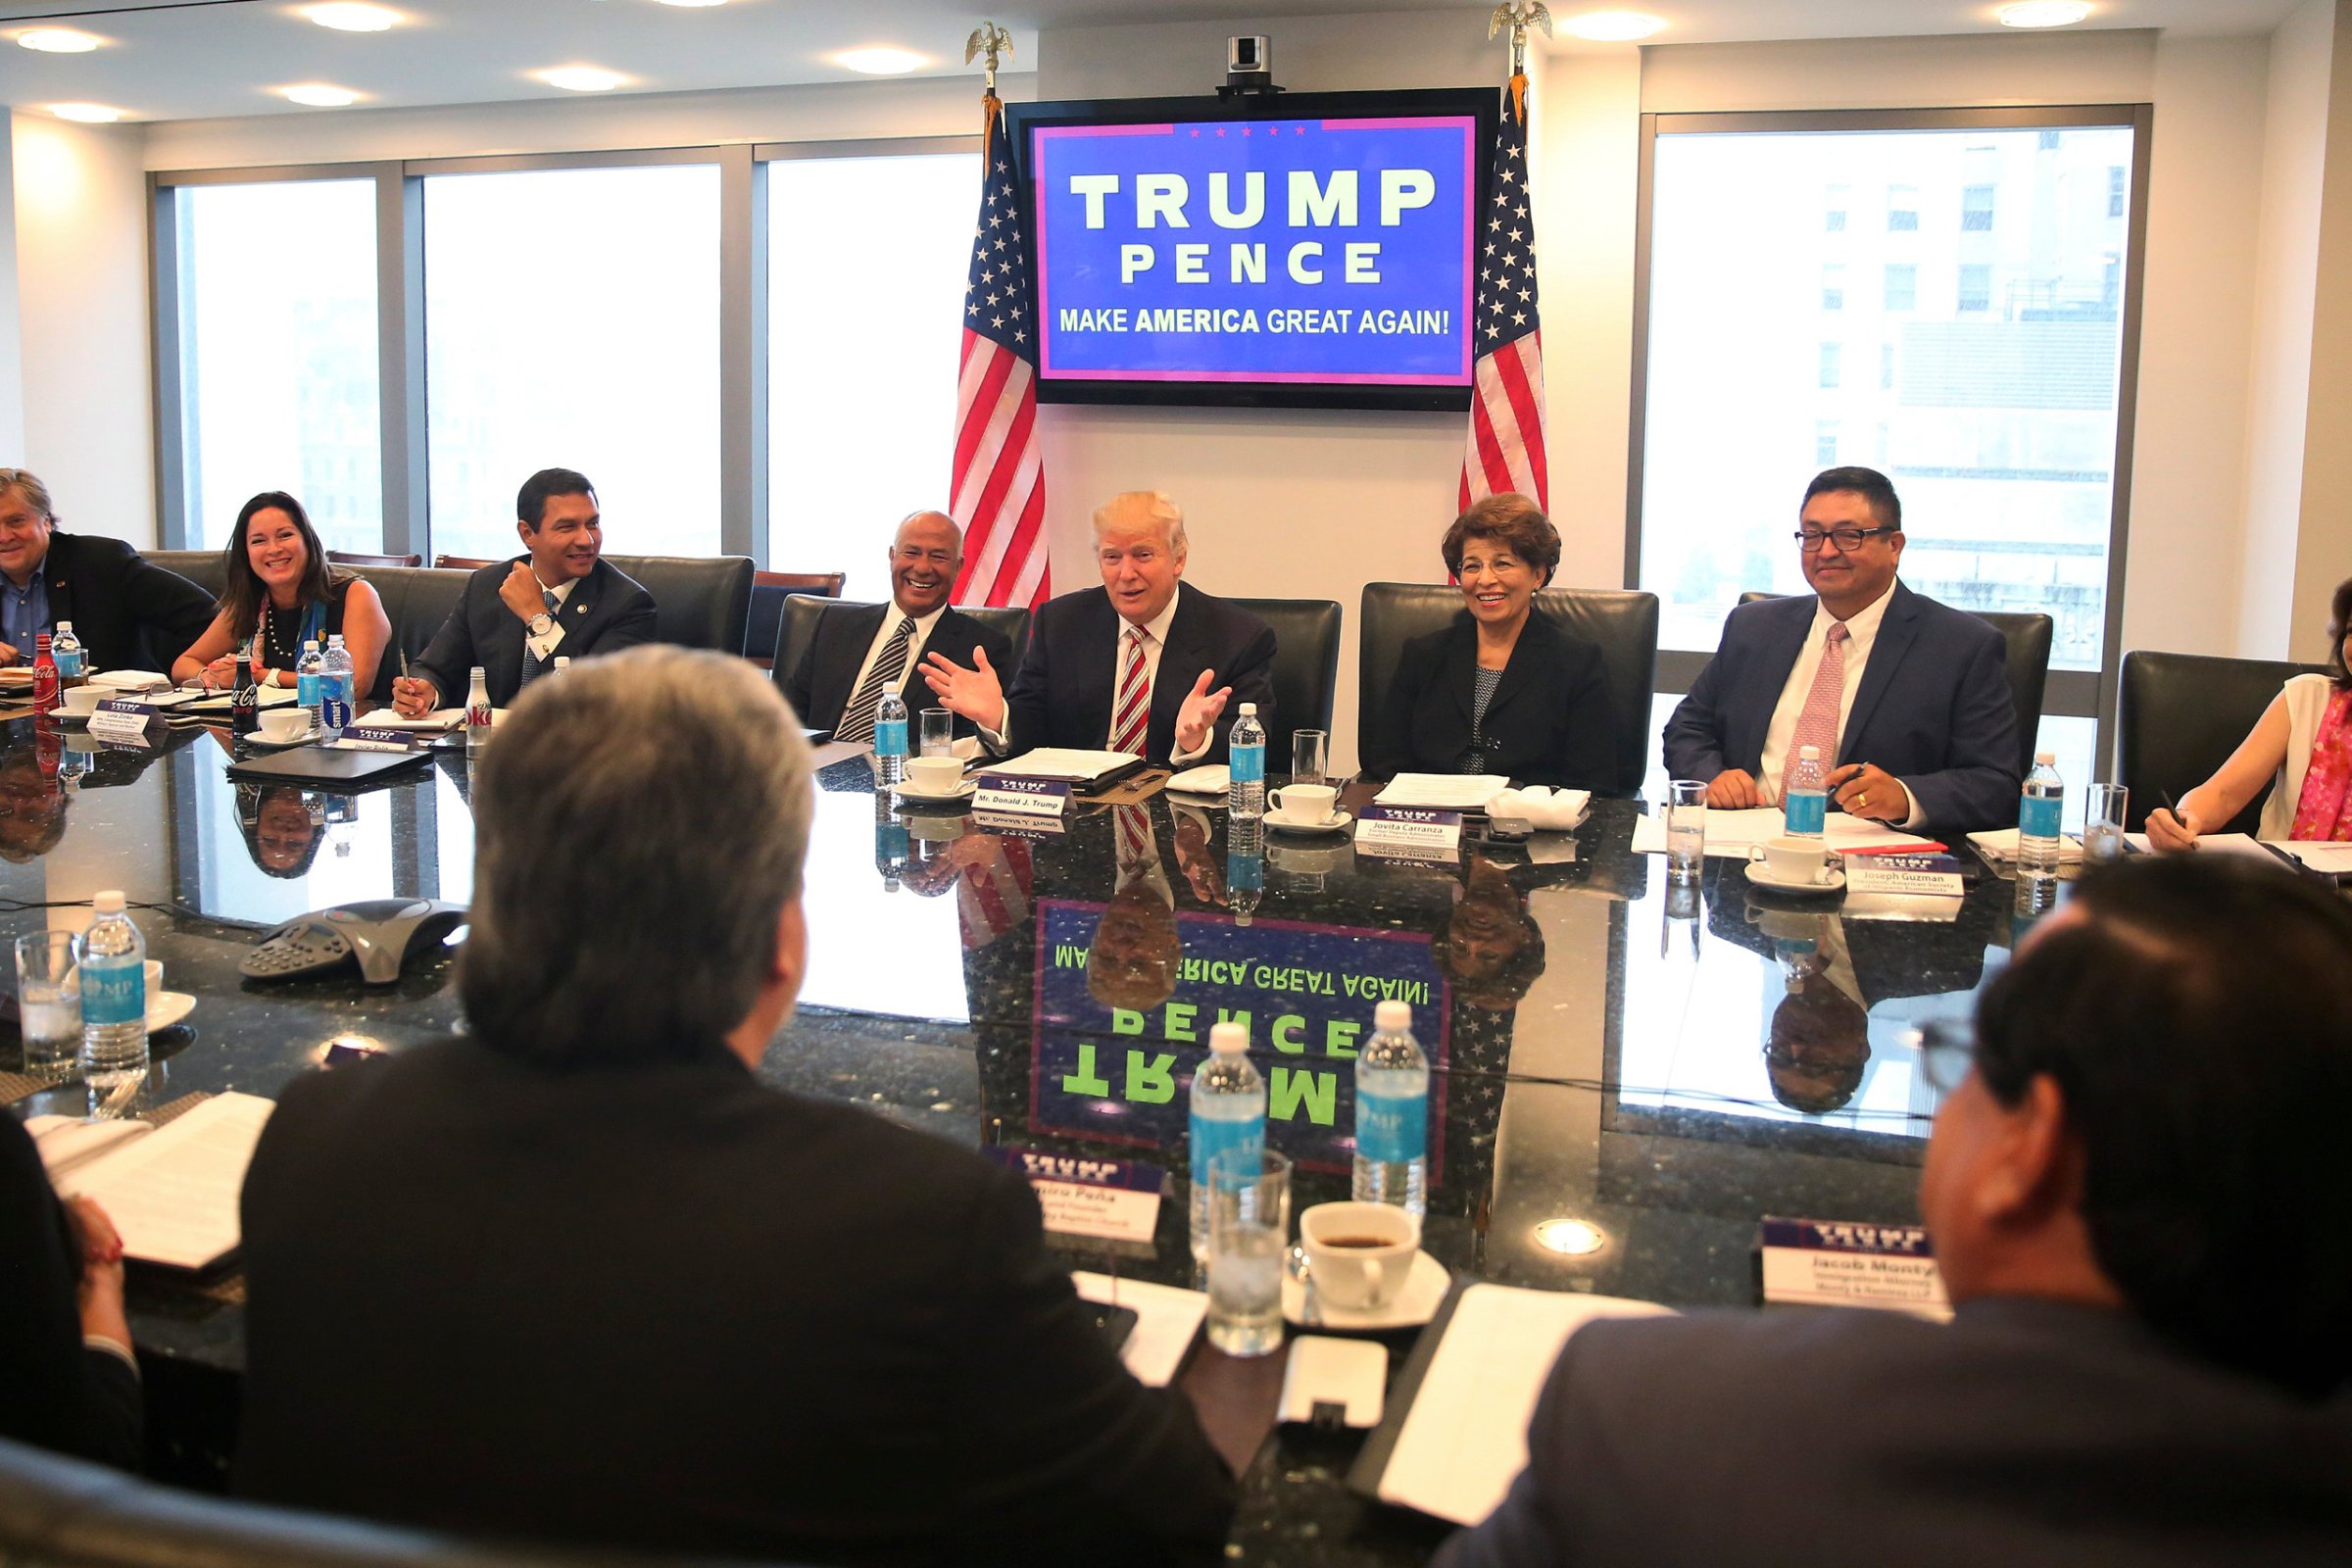 Republican presidential nominee Donald Trump speaks during a meeting with his Hispanic Advisory Council at Trump Tower in the Manhattan borough of New York City on Aug. 20, 2016.